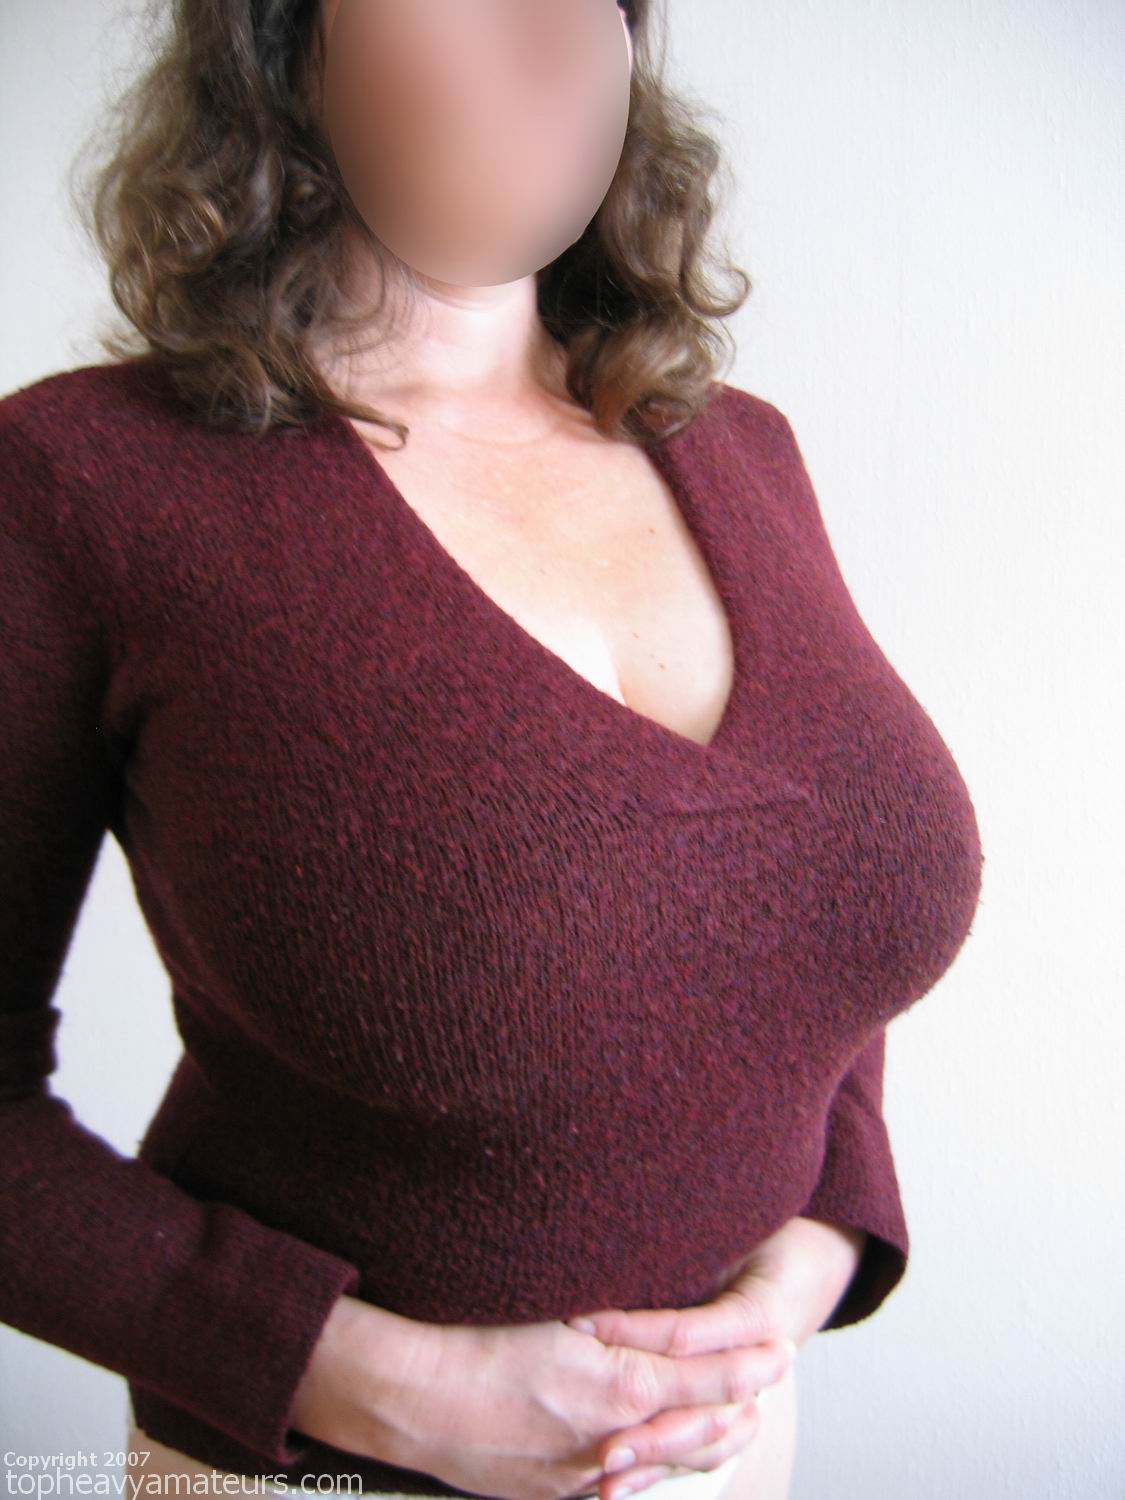 Boobs Picdump collection of busty women in tight sweaters